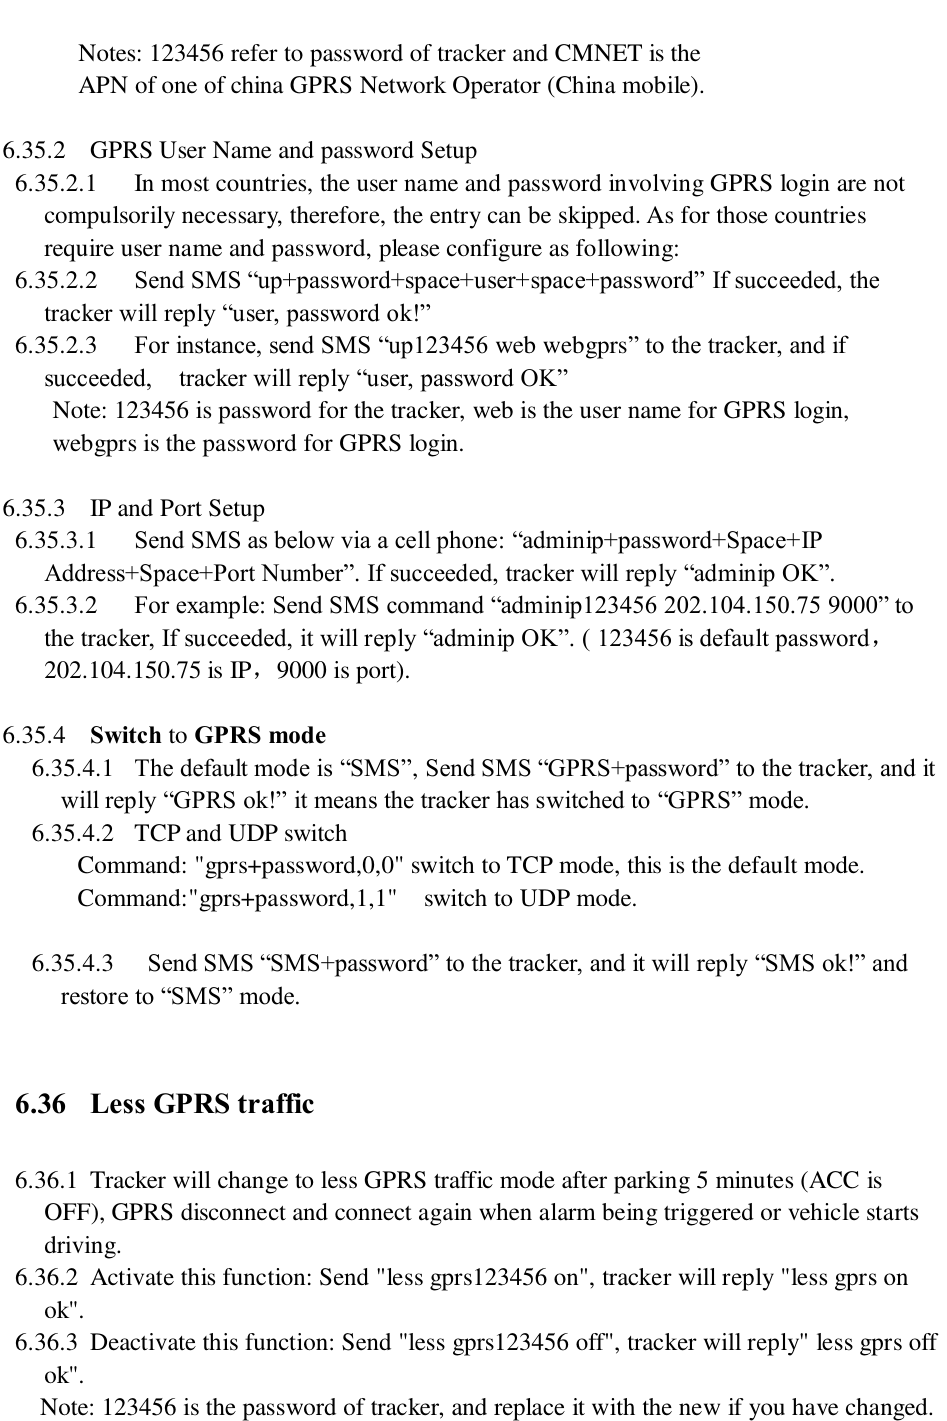         Notes: 123456 refer to password of tracker and CMNET is the       APN of one of china GPRS Network Operator (China mobile).    6.35.2 GPRS User Name and password Setup 6.35.2.1 In most countries, the user name and password involving GPRS login are not compulsorily necessary, therefore, the entry can be skipped. As for those countries require user name and password, please configure as following: 6.35.2.2 Send SMS “up+password+space+user+space+password” If succeeded, the tracker will reply “user, password ok!”   6.35.2.3 For instance, send SMS “up123456 web webgprs” to the tracker, and if succeeded,    tracker will reply “user, password OK” Note: 123456 is password for the tracker, web is the user name for GPRS login, webgprs is the password for GPRS login.  6.35.3 IP and Port Setup 6.35.3.1 Send SMS as below via a cell phone: “adminip+password+Space+IP Address+Space+Port Number”. If succeeded, tracker will reply “adminip OK”. 6.35.3.2 For example: Send SMS command “adminip123456 202.104.150.75 9000” to the tracker, If succeeded, it will reply “adminip OK”. ( 123456 is default password，202.104.150.75 is IP，9000 is port).  6.35.4 Switch to GPRS mode 6.35.4.1 The default mode is “SMS”, Send SMS “GPRS+password” to the tracker, and it will reply “GPRS ok!” it means the tracker has switched to “GPRS” mode. 6.35.4.2 TCP and UDP switch Command: &quot;gprs+password,0,0&quot; switch to TCP mode, this is the default mode. Command:&quot;gprs+password,1,1&quot;    switch to UDP mode.  6.35.4.3  Send SMS “SMS+password” to the tracker, and it will reply “SMS ok!” and restore to “SMS” mode.  6.36 Less GPRS traffic 6.36.1 Tracker will change to less GPRS traffic mode after parking 5 minutes (ACC is OFF), GPRS disconnect and connect again when alarm being triggered or vehicle starts driving. 6.36.2 Activate this function: Send &quot;less gprs123456 on&quot;, tracker will reply &quot;less gprs on ok&quot;. 6.36.3 Deactivate this function: Send &quot;less gprs123456 off&quot;, tracker will reply&quot; less gprs off ok&quot;. Note: 123456 is the password of tracker, and replace it with the new if you have changed.  